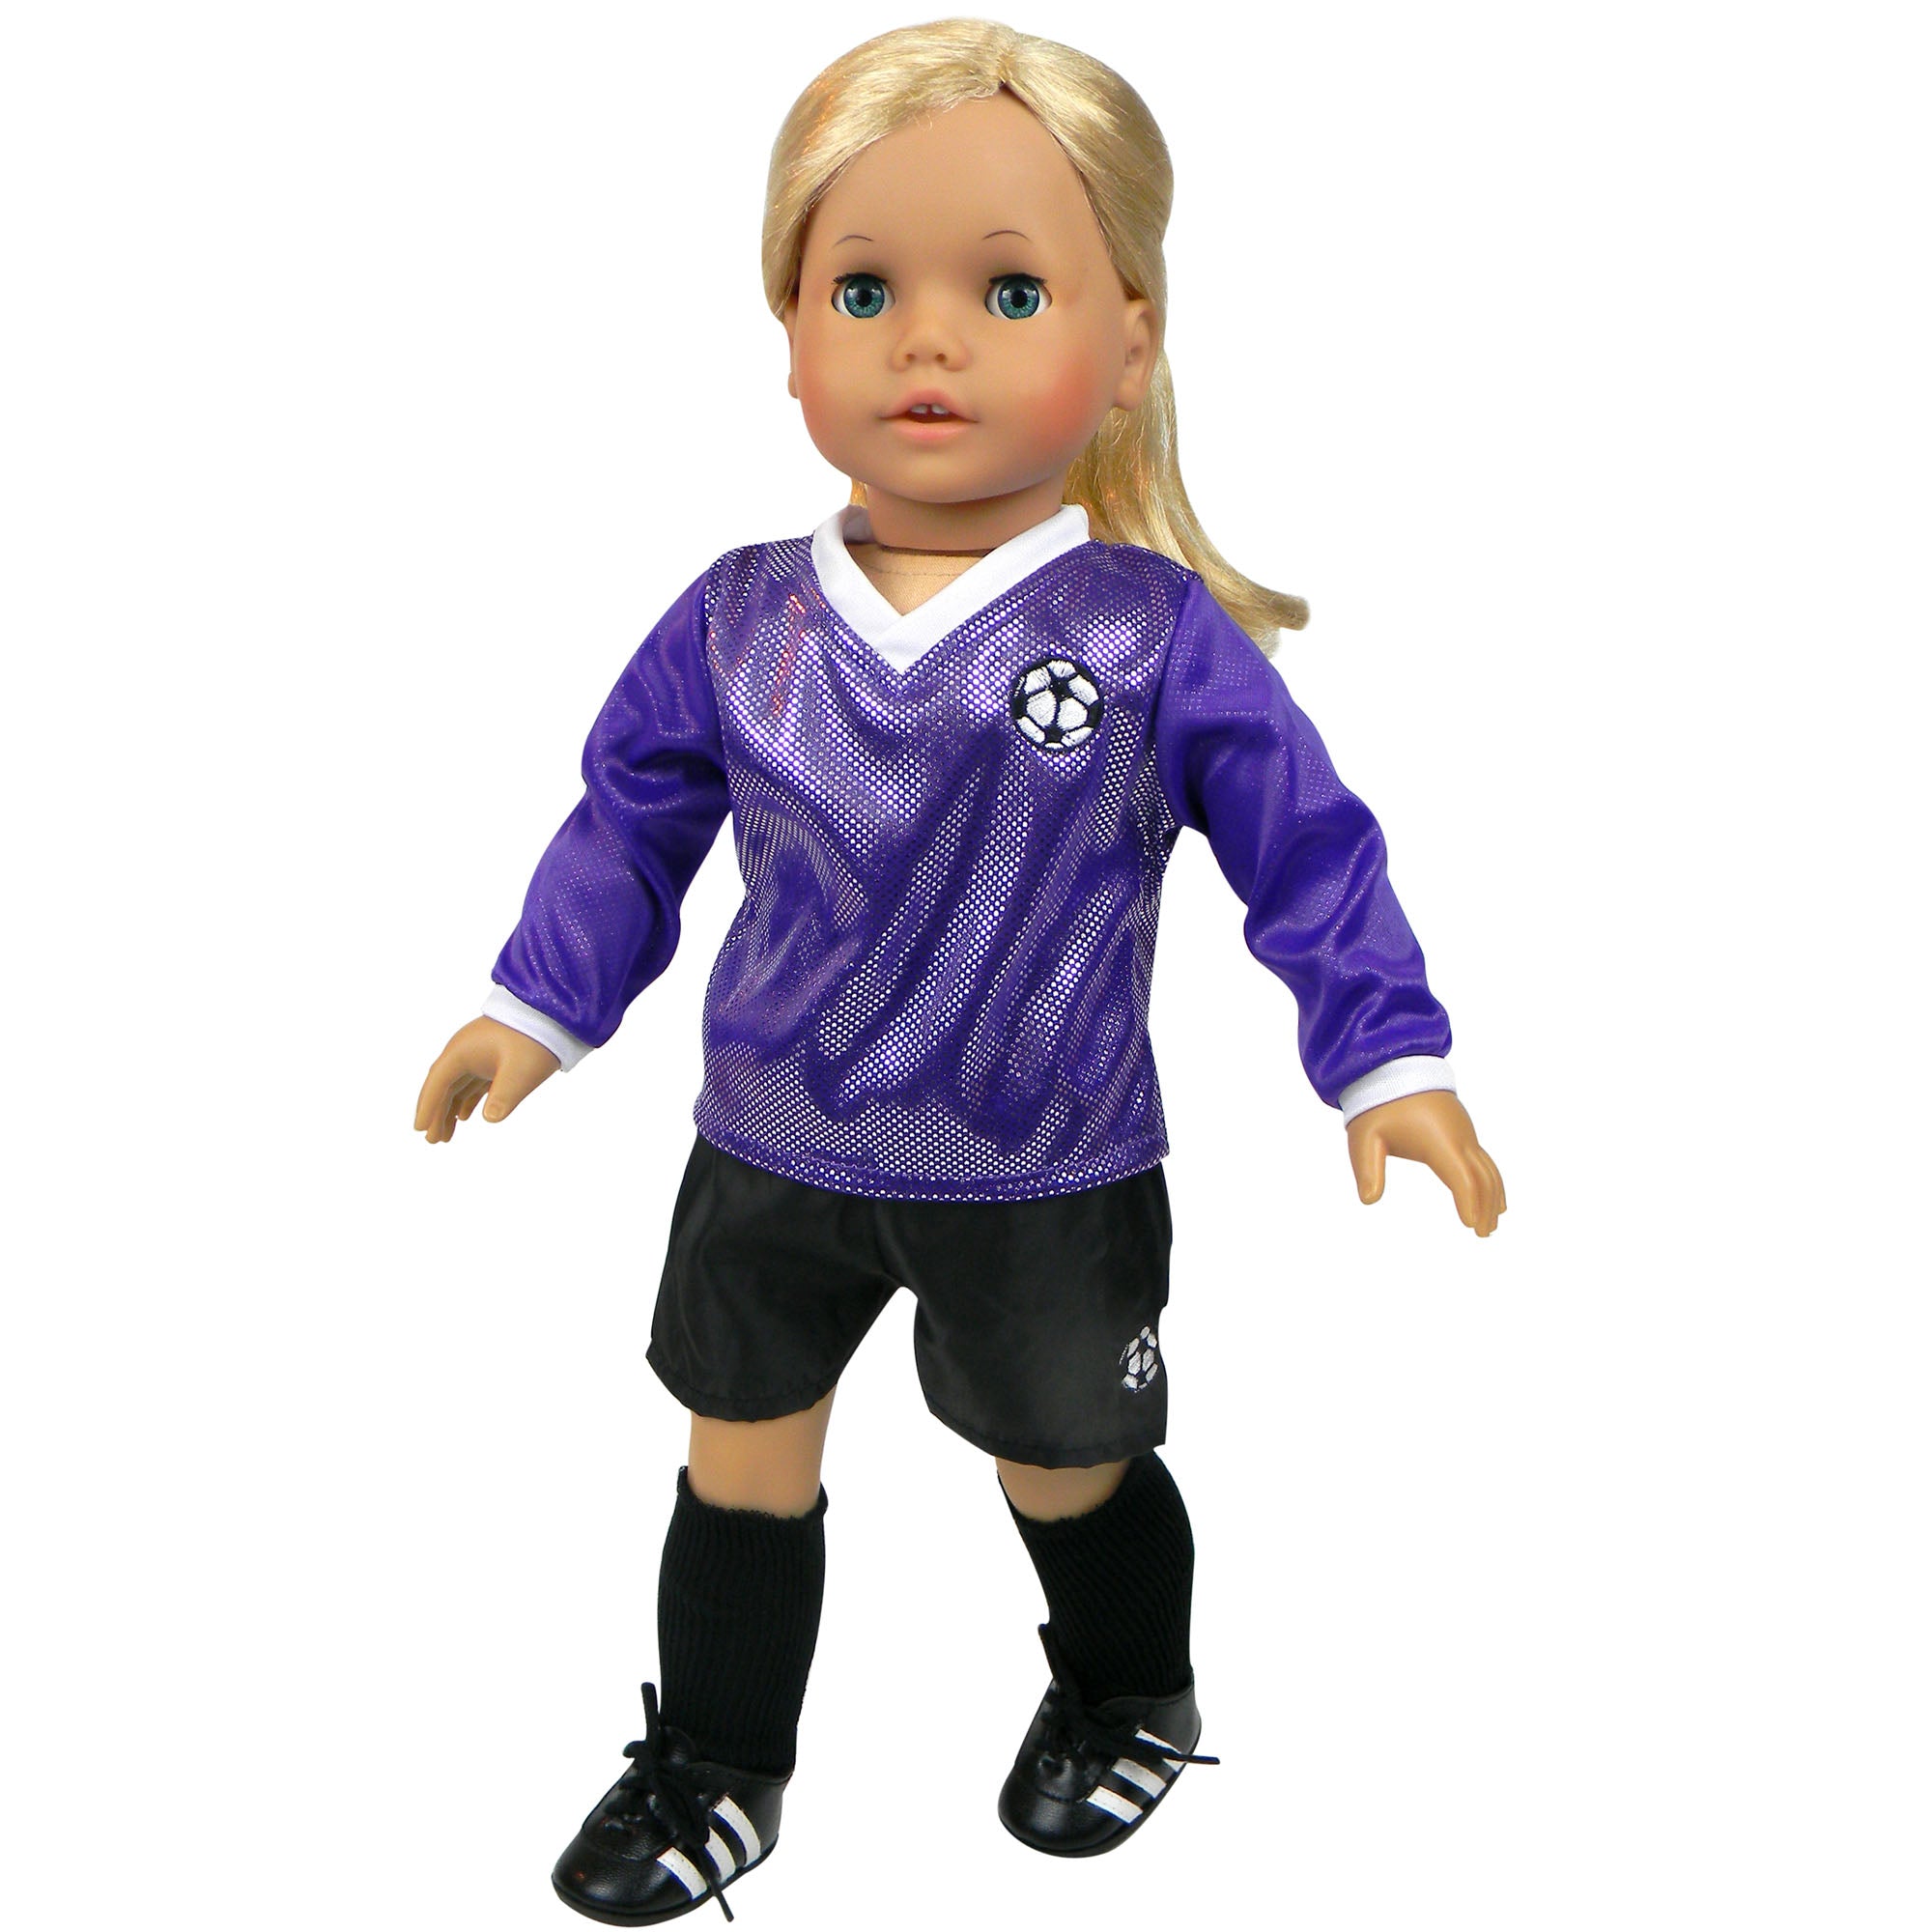 Sophia’s Doll Soccer Outfit 6-Piece Set with Ball for 18" Dolls